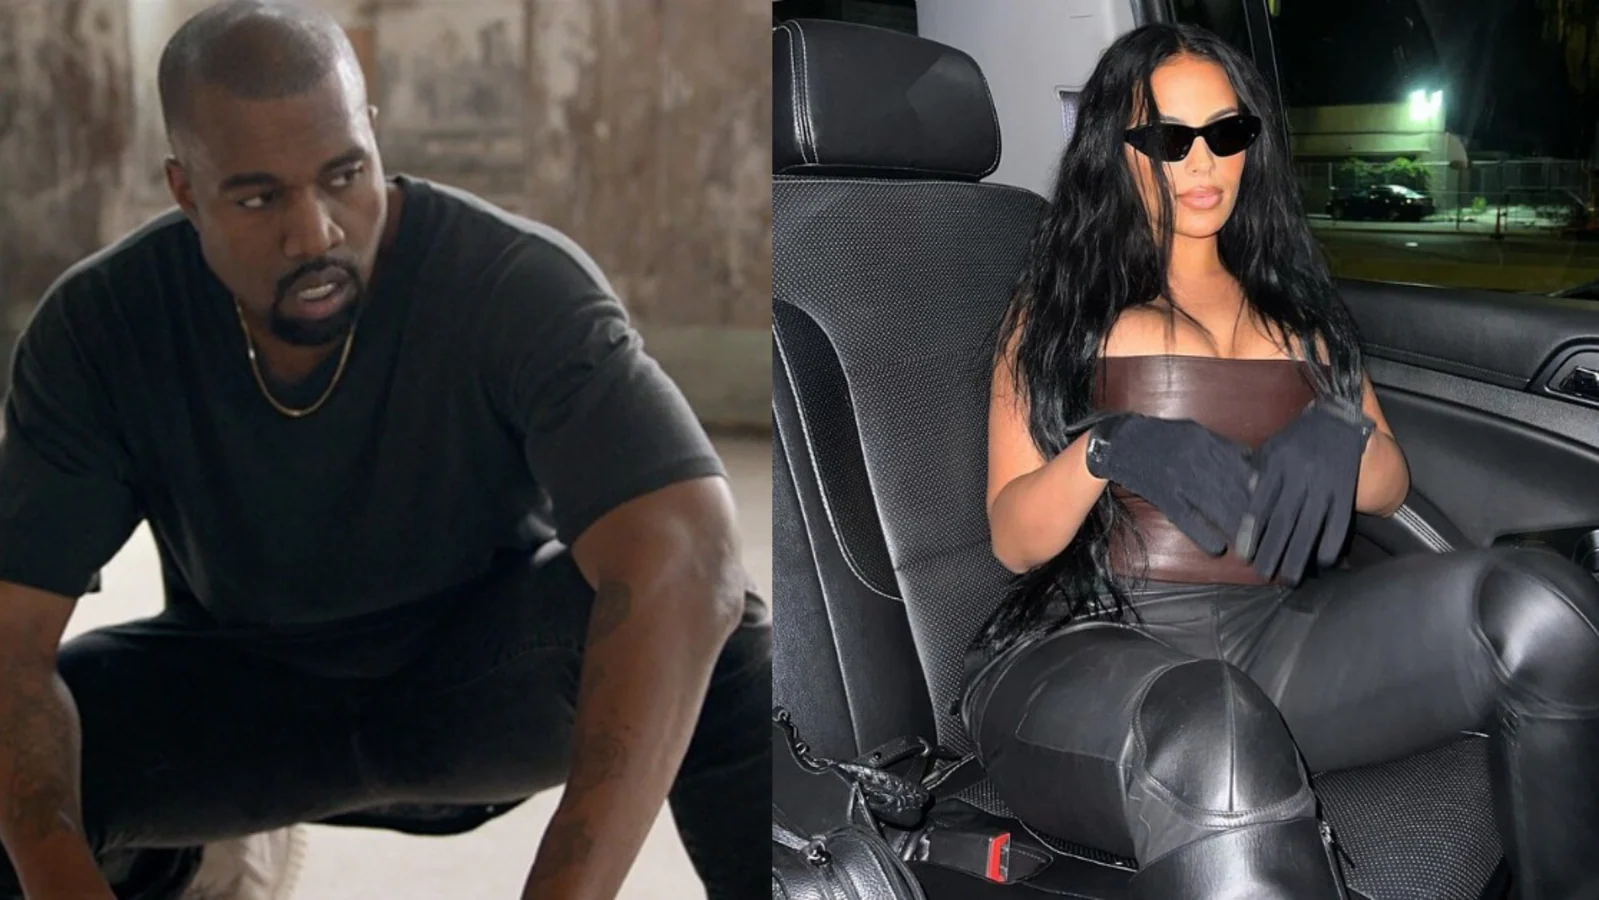 Kanye West spotted on date with ‘Kim Kardashian lookalike’ Chaney Jones, fans say, ‘she look exactly like her’